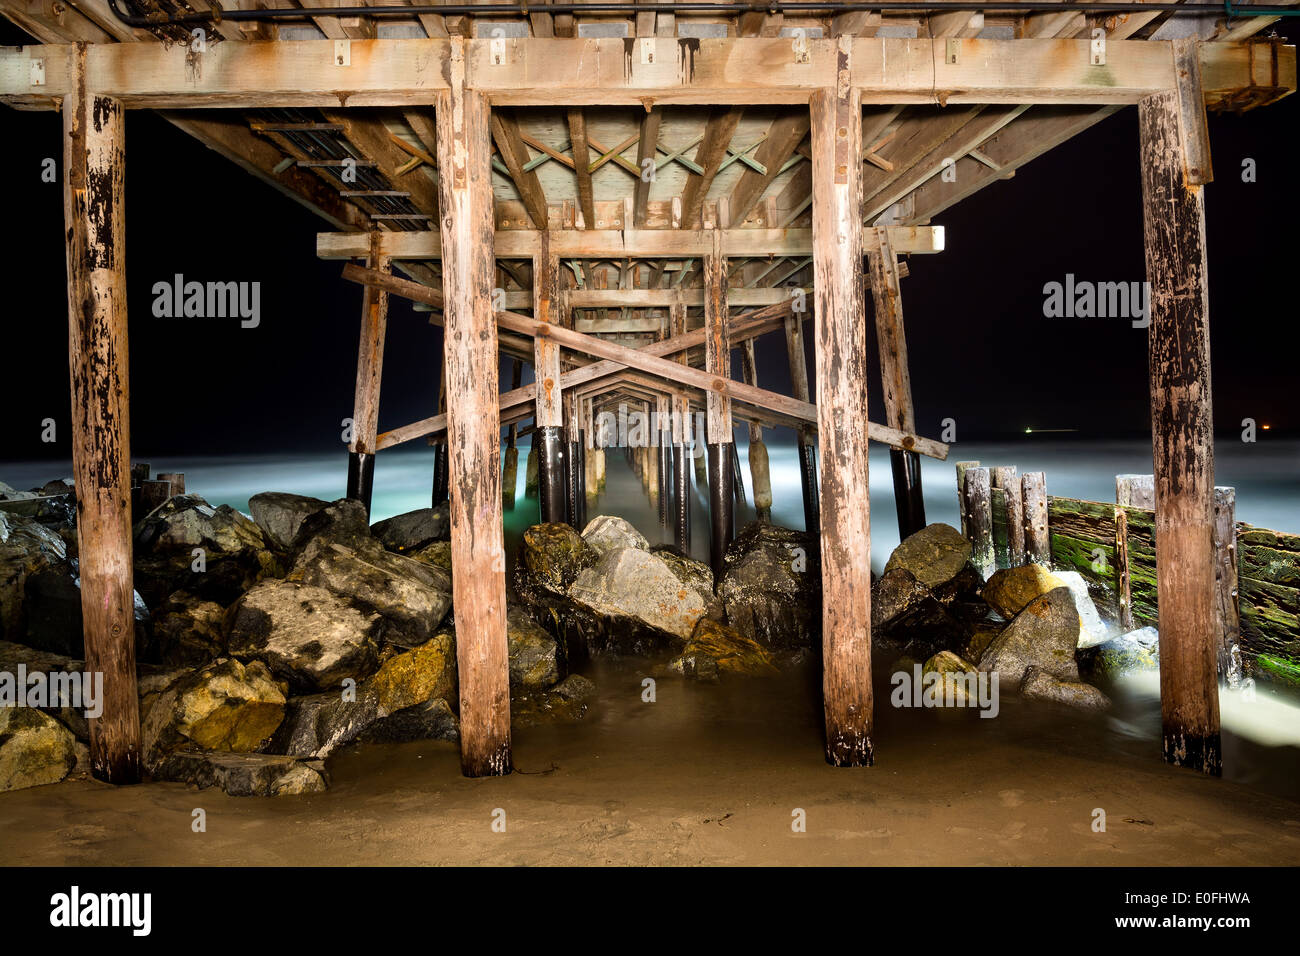 A light painted image of Balboa Pier underside taken at 4:00 AM with a slow exposure shows the intricate detail of the structure Stock Photo